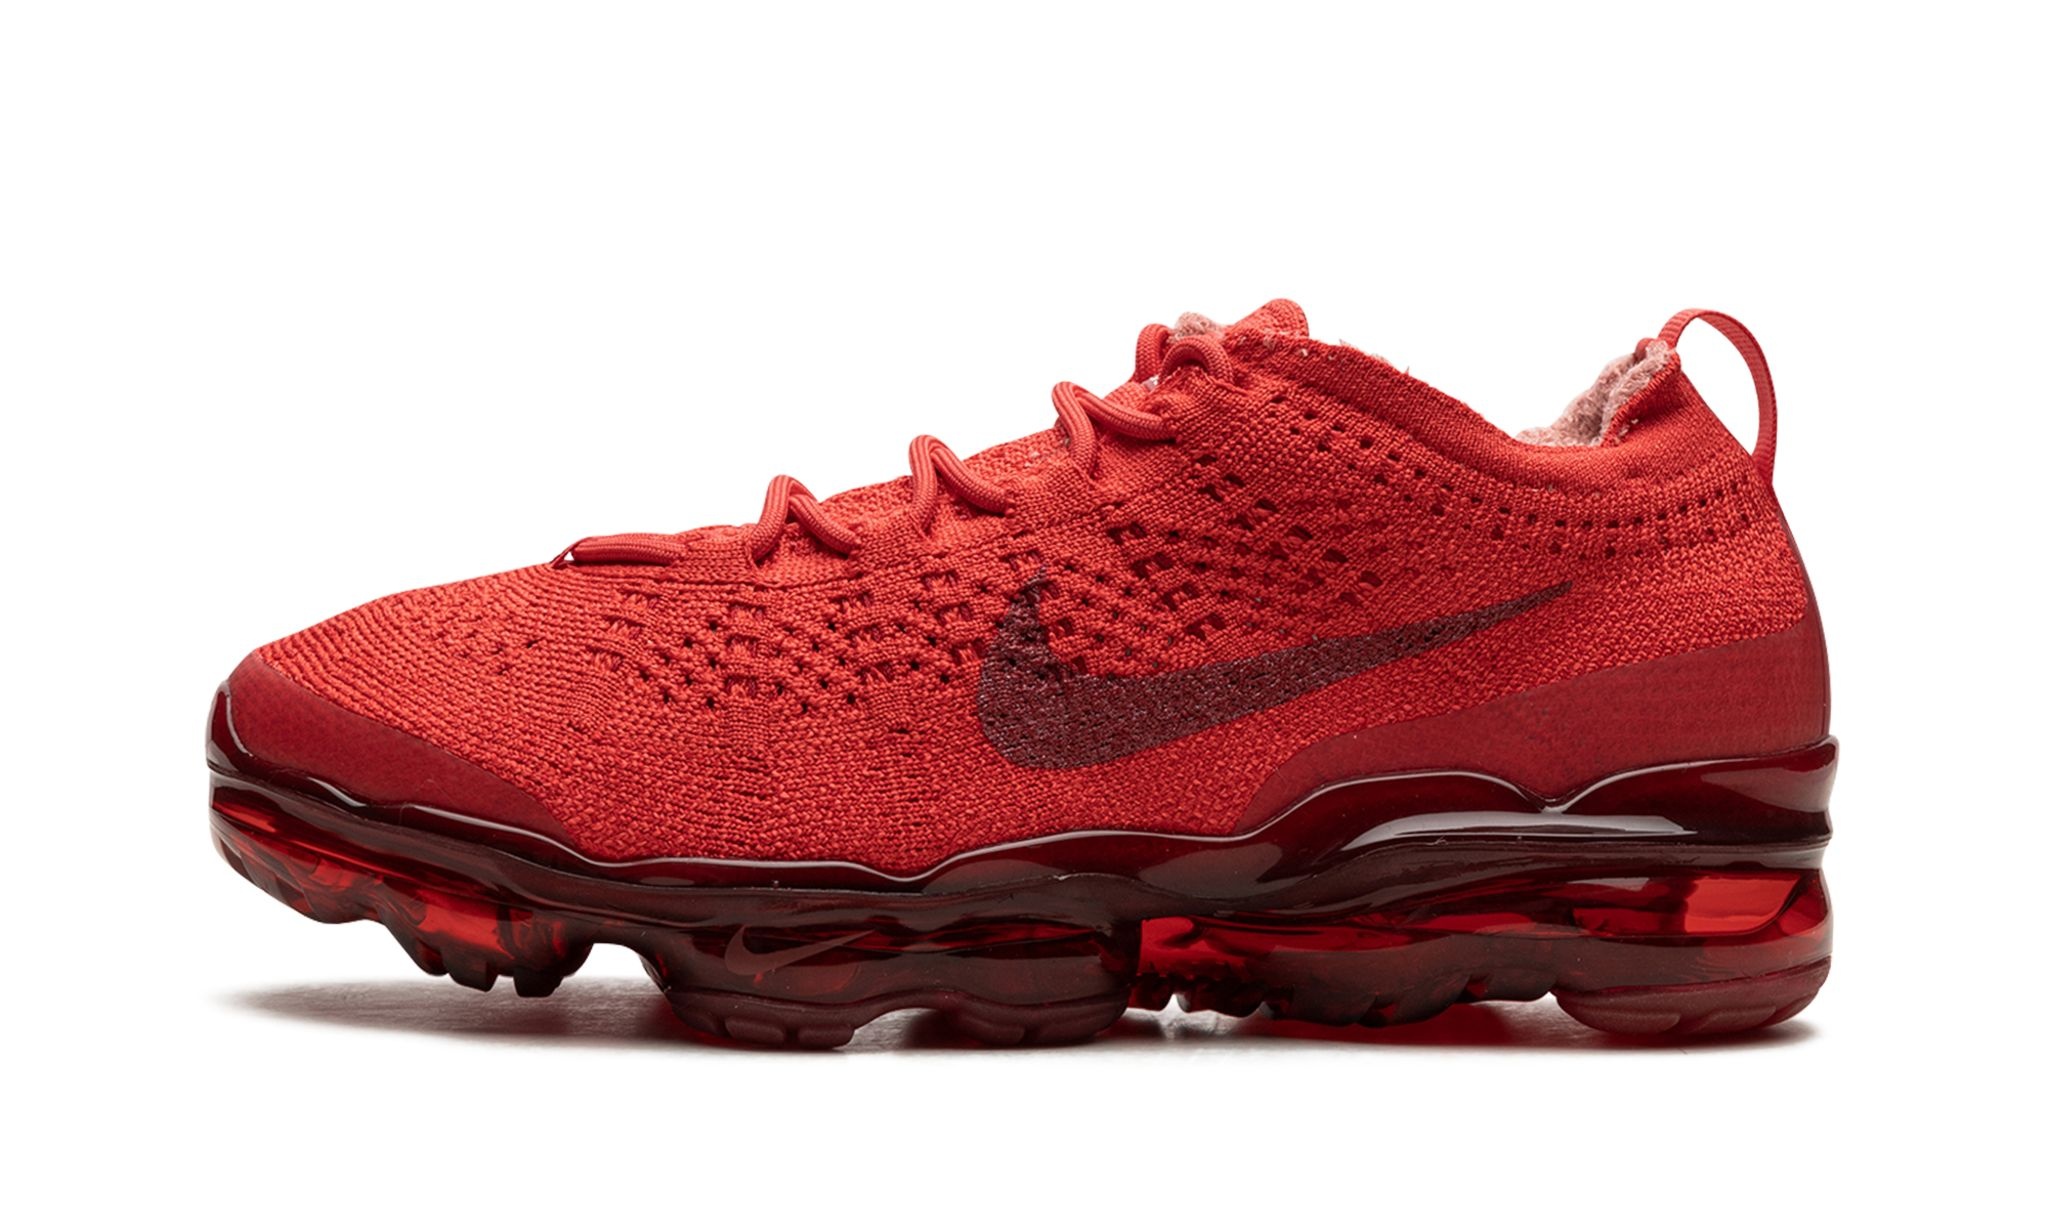 Air Vapormax 2023 Flyknit "Track Red" - 1